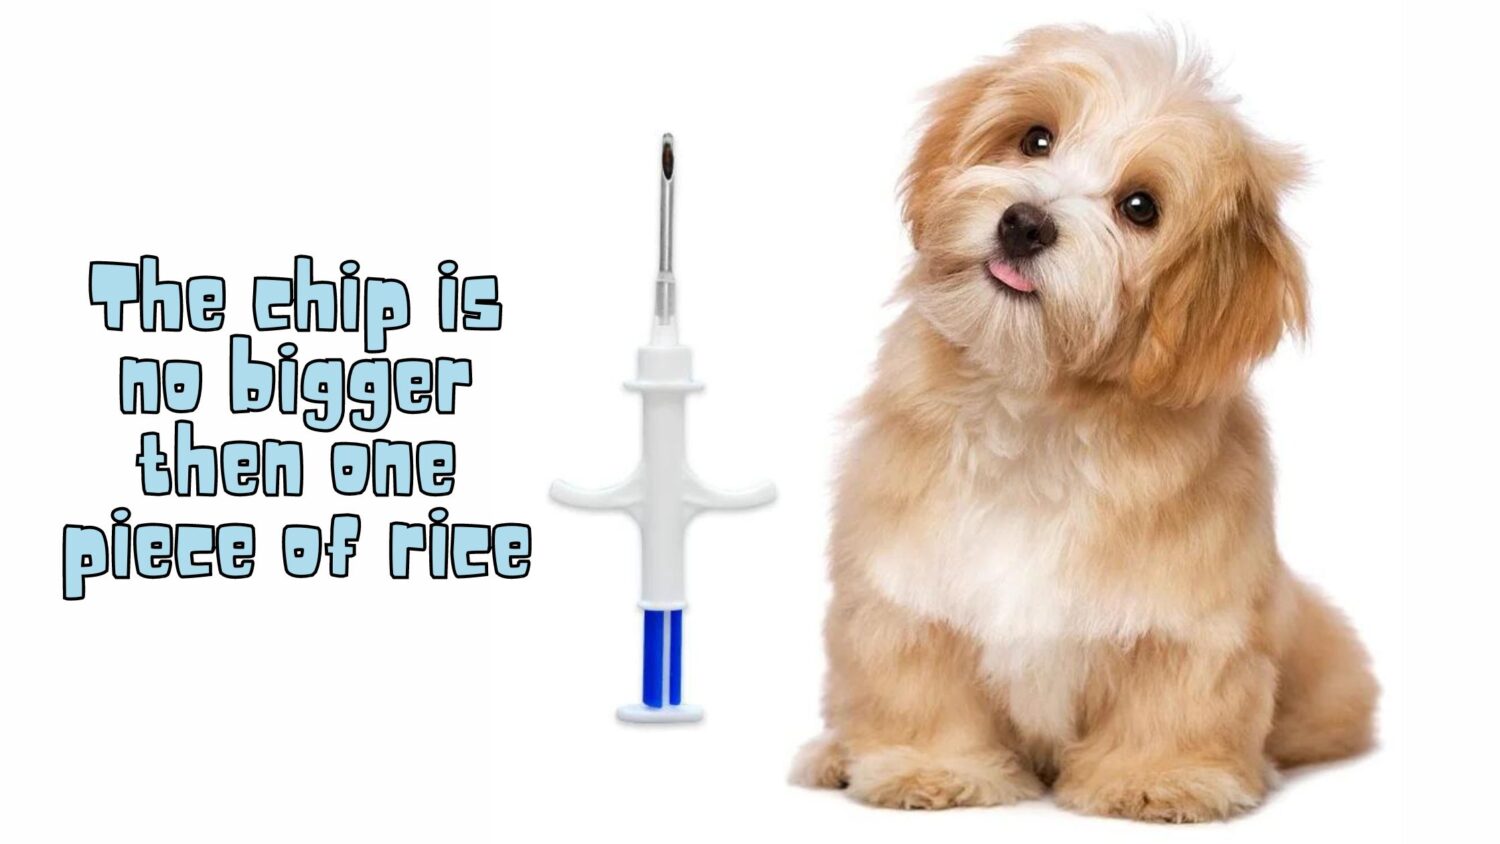 microchipping dogs